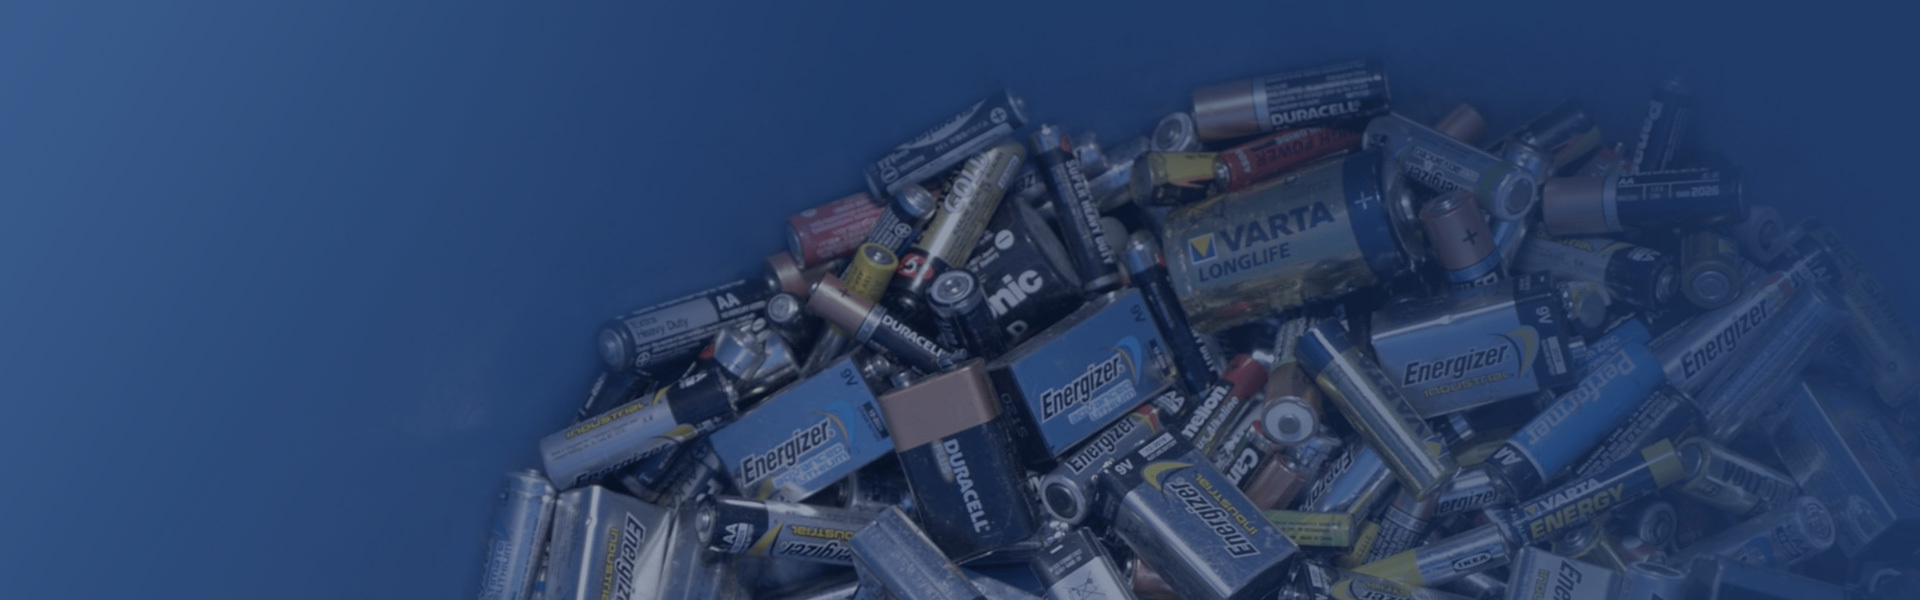 Types of battery recycling